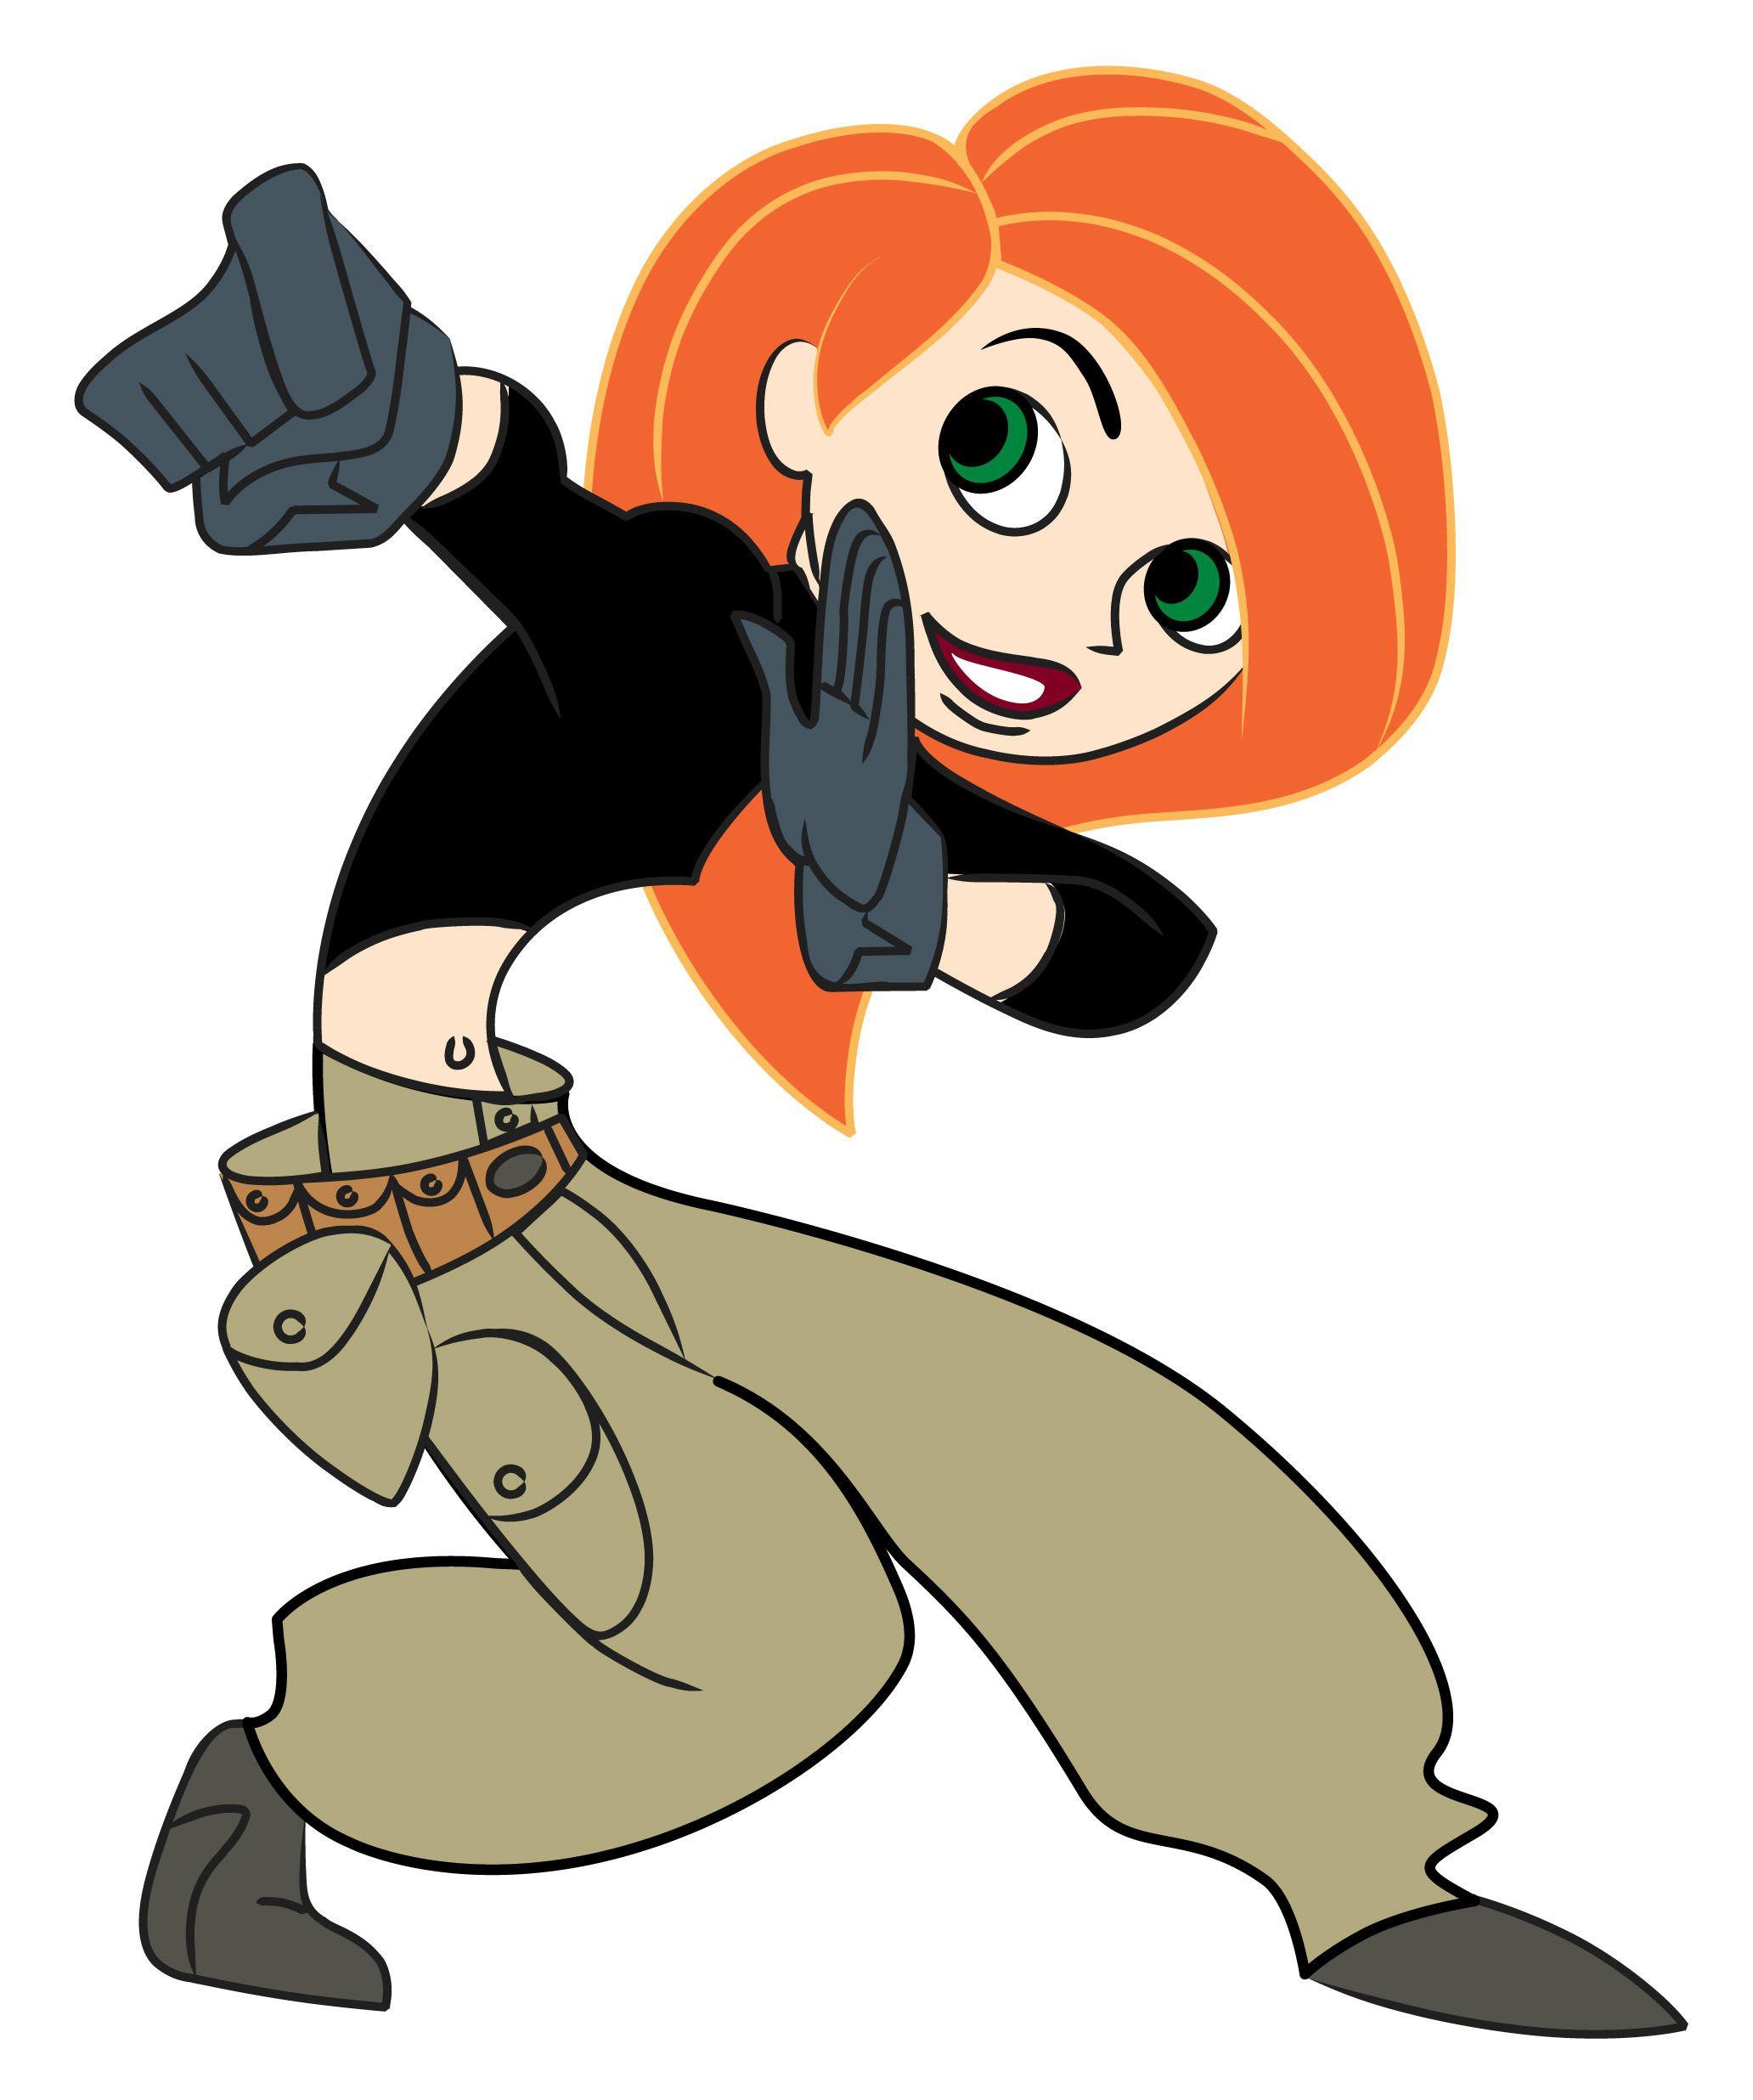 Kim Possible screenshots, image and picture